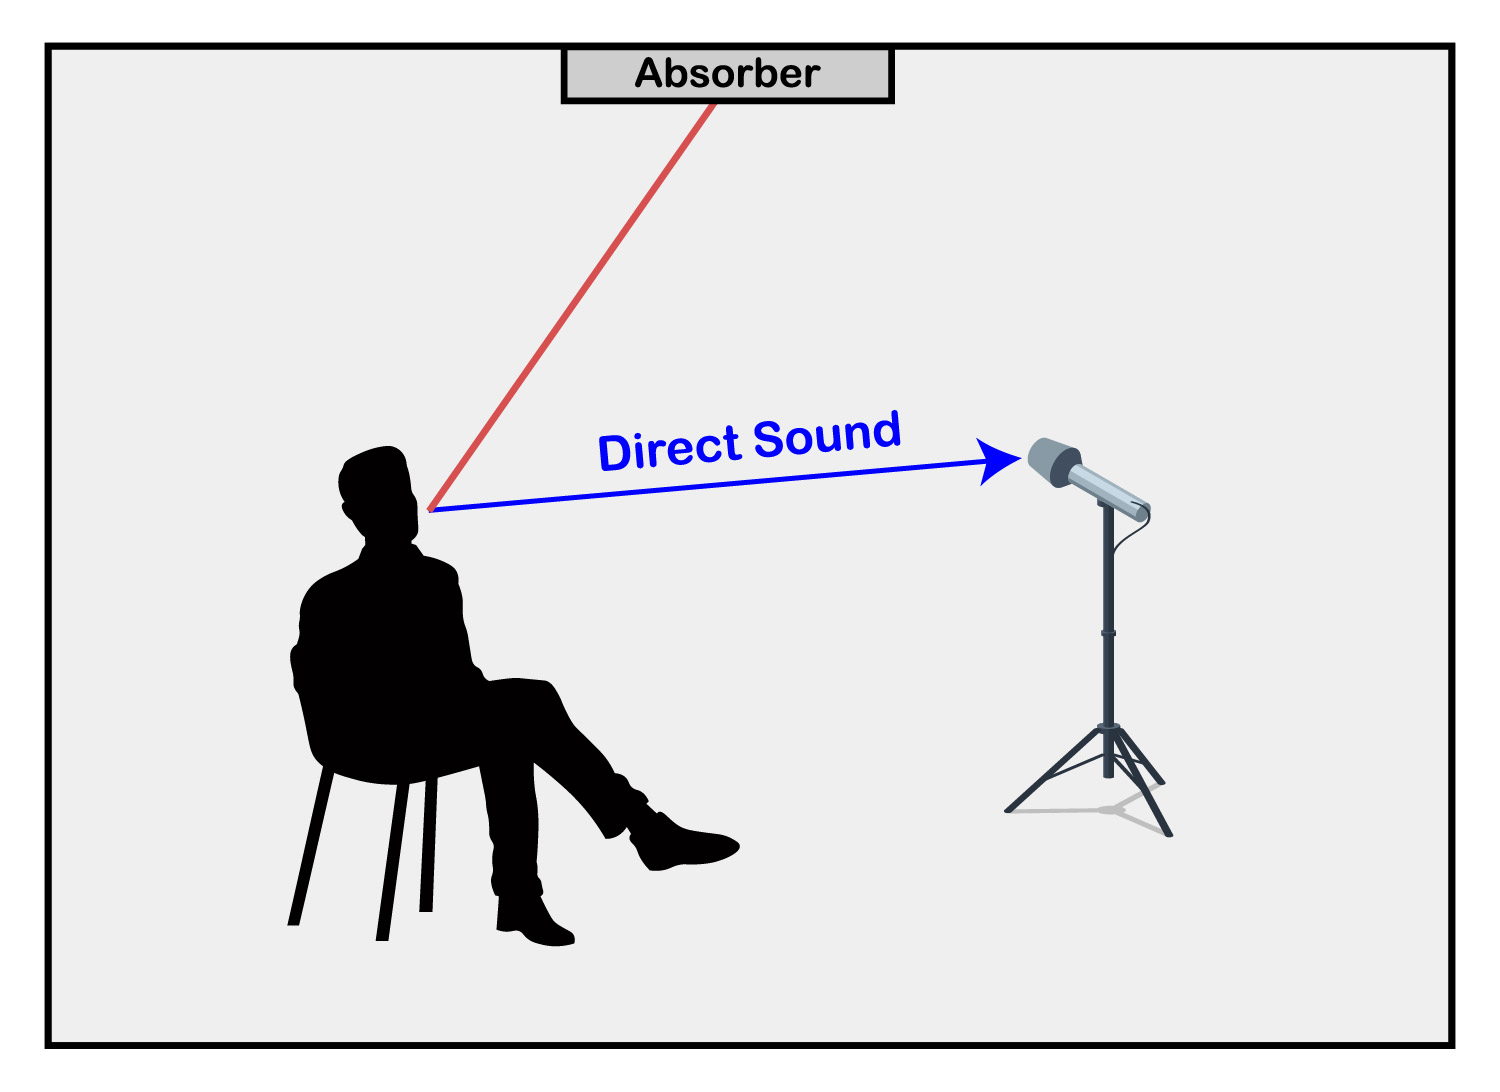 By attaching absorbers to walls and ceilings, the sound waves are absorbed so that no sound reflections enter the microphone.